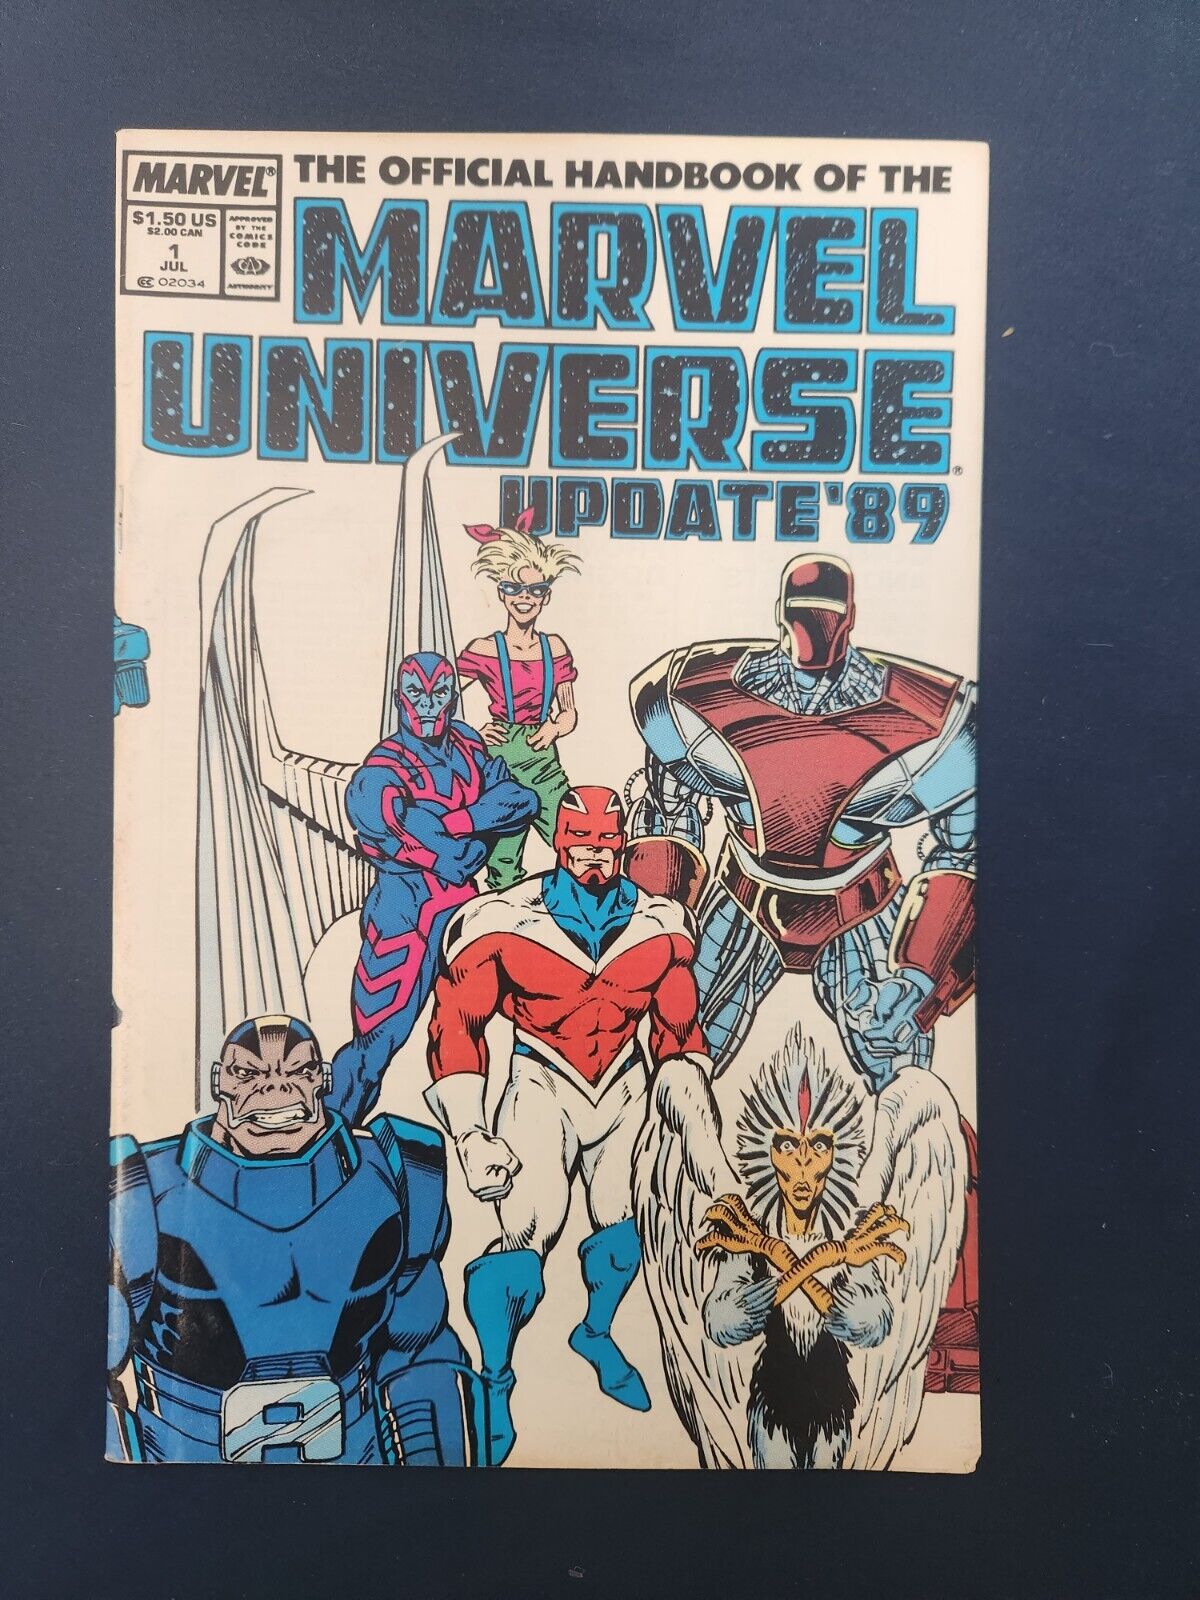 OFFICIAL HANDBOOK OF THE MARVEL UNIVERSE 1   Update '89. NM/M condition 